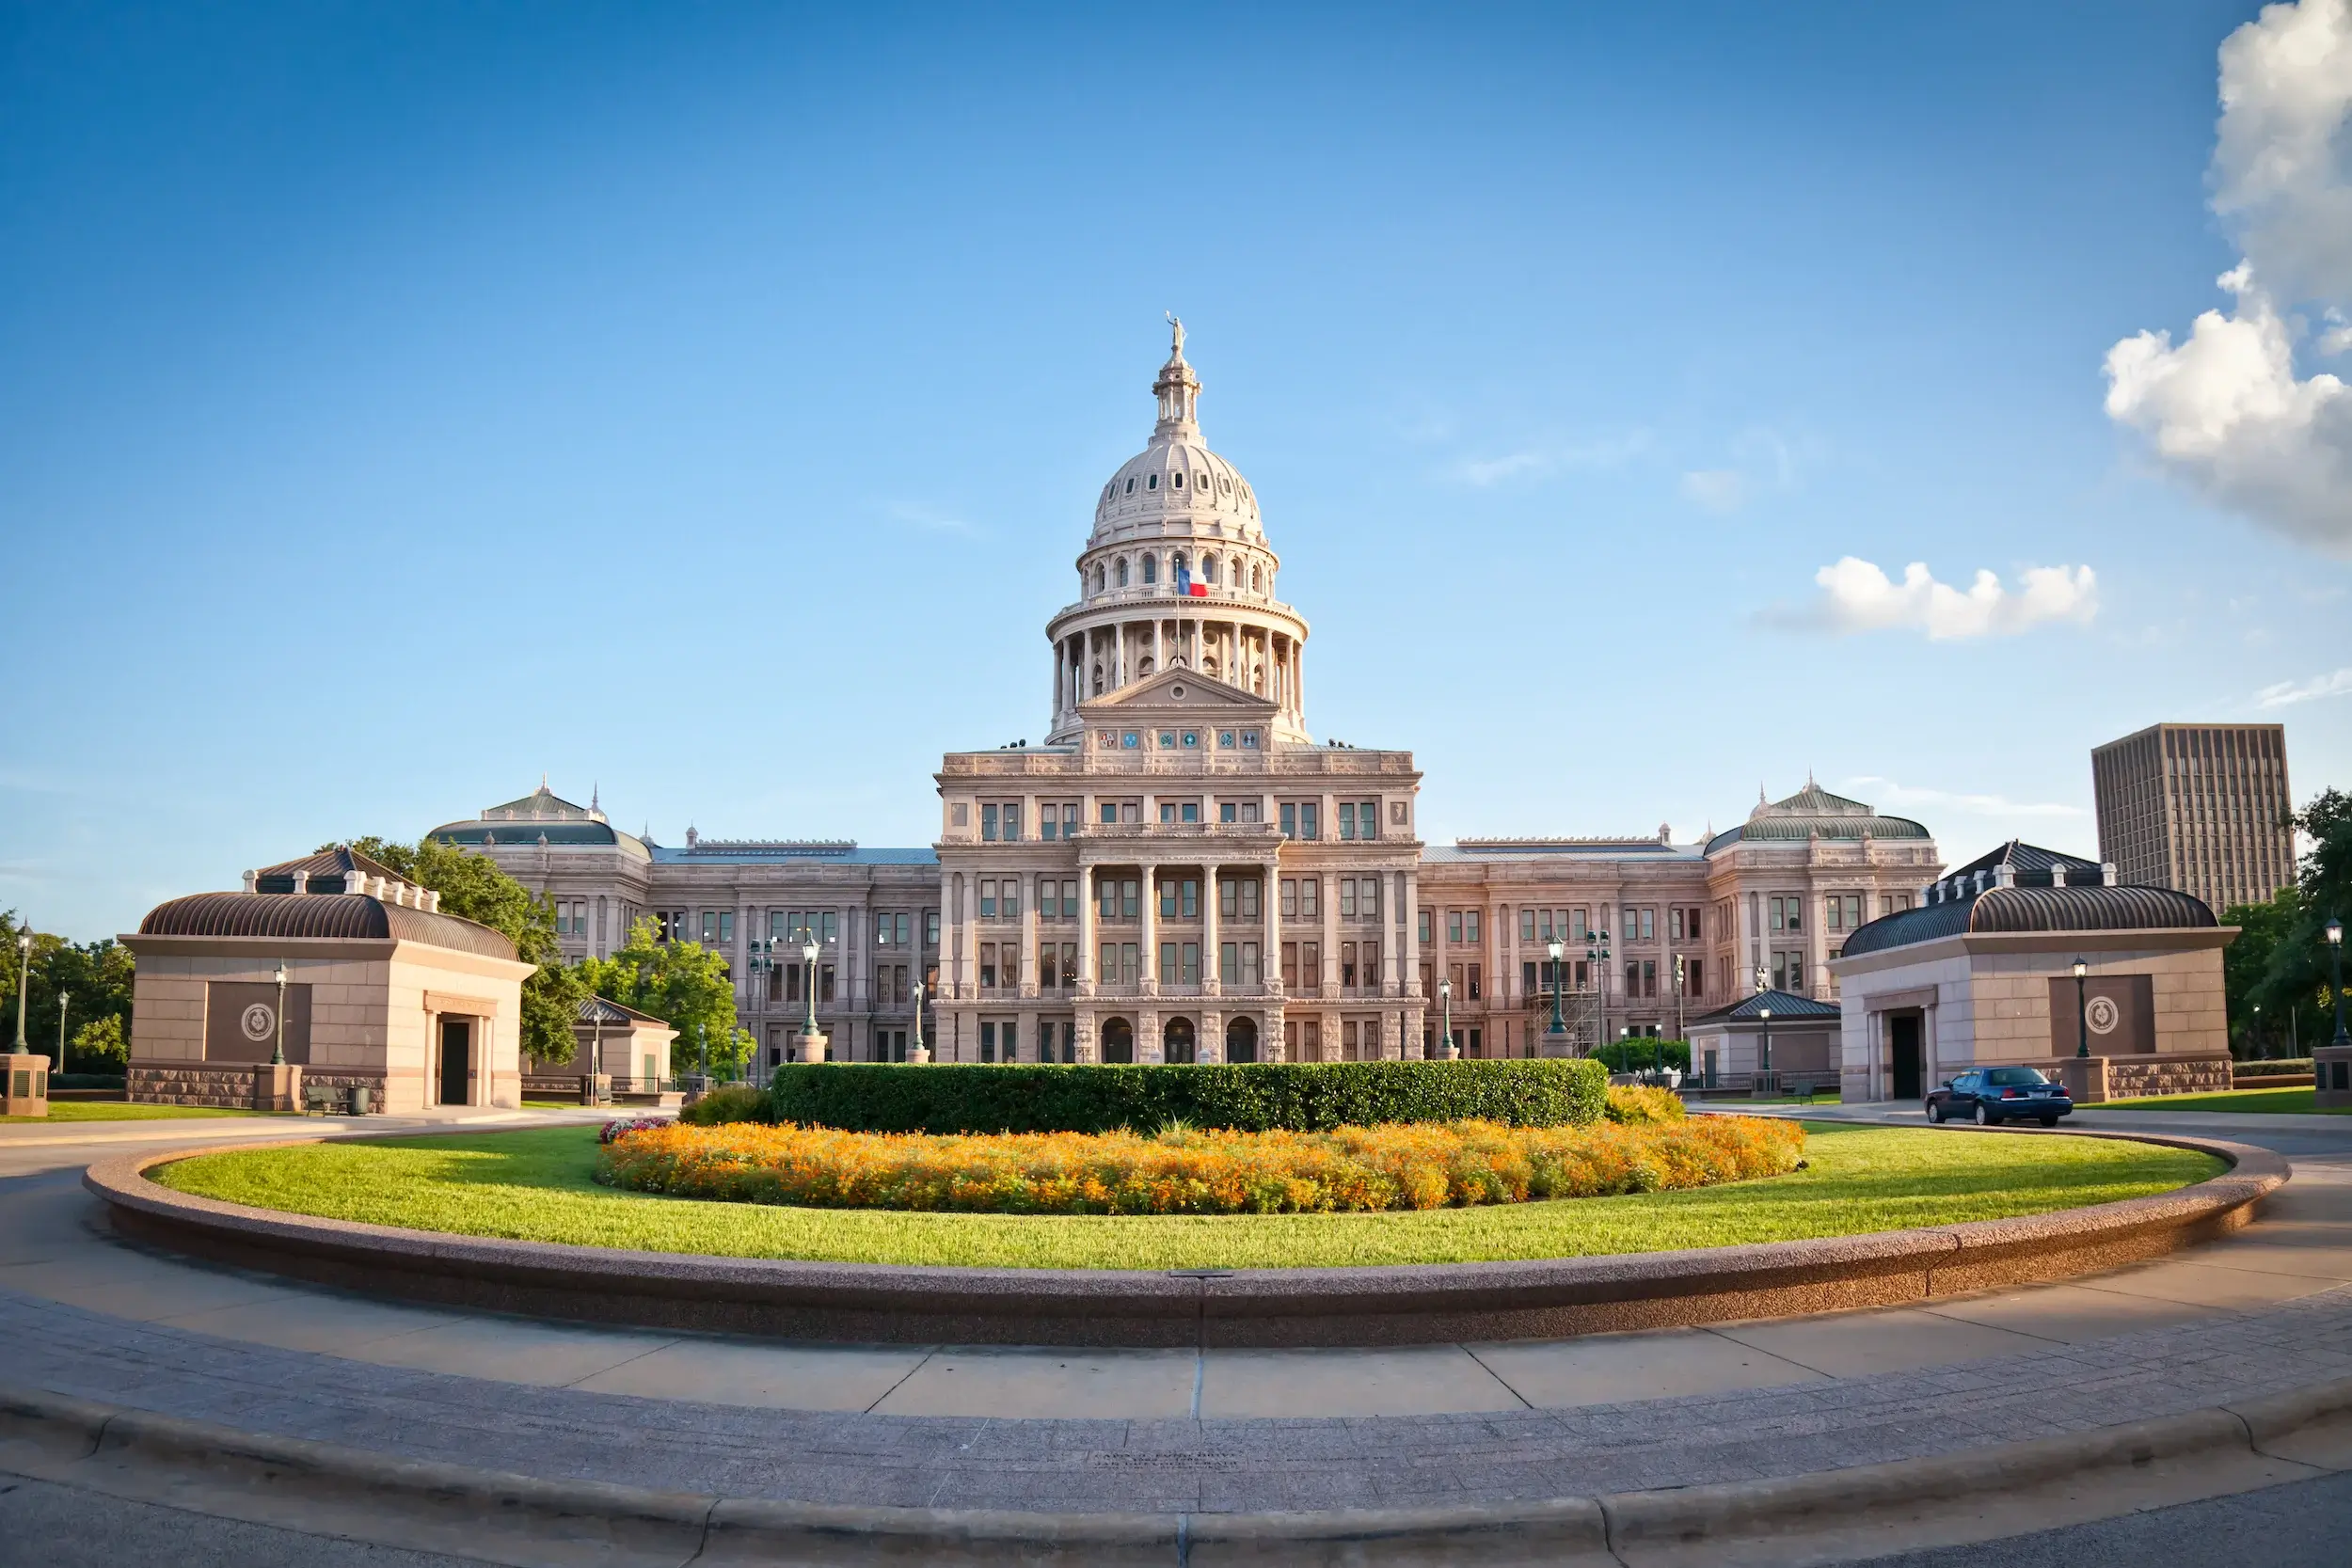 The Texas State Capitol Building in downtown Austin, Texas.